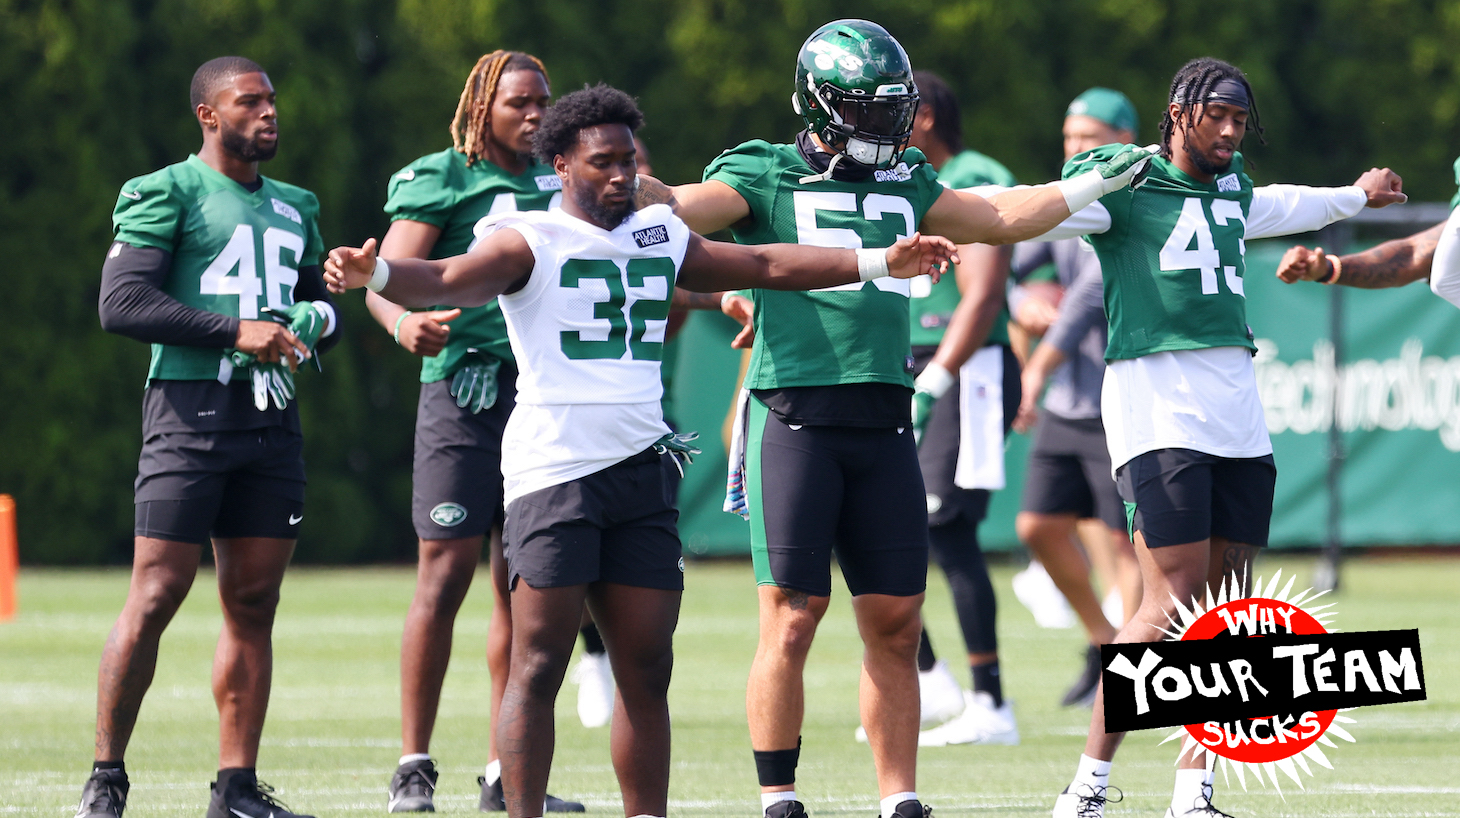 FLORHAM PARK, NJ - JULY 28: Michael Carter #32, Jarrad Davis #52 and Del'Shawn Phillips #43 of the New York Jets during morning practice at Atlantic Health Jets Training Center on July 28, 2021 in Florham Park, New Jersey. (Photo by Rich Schultz/Getty Images)